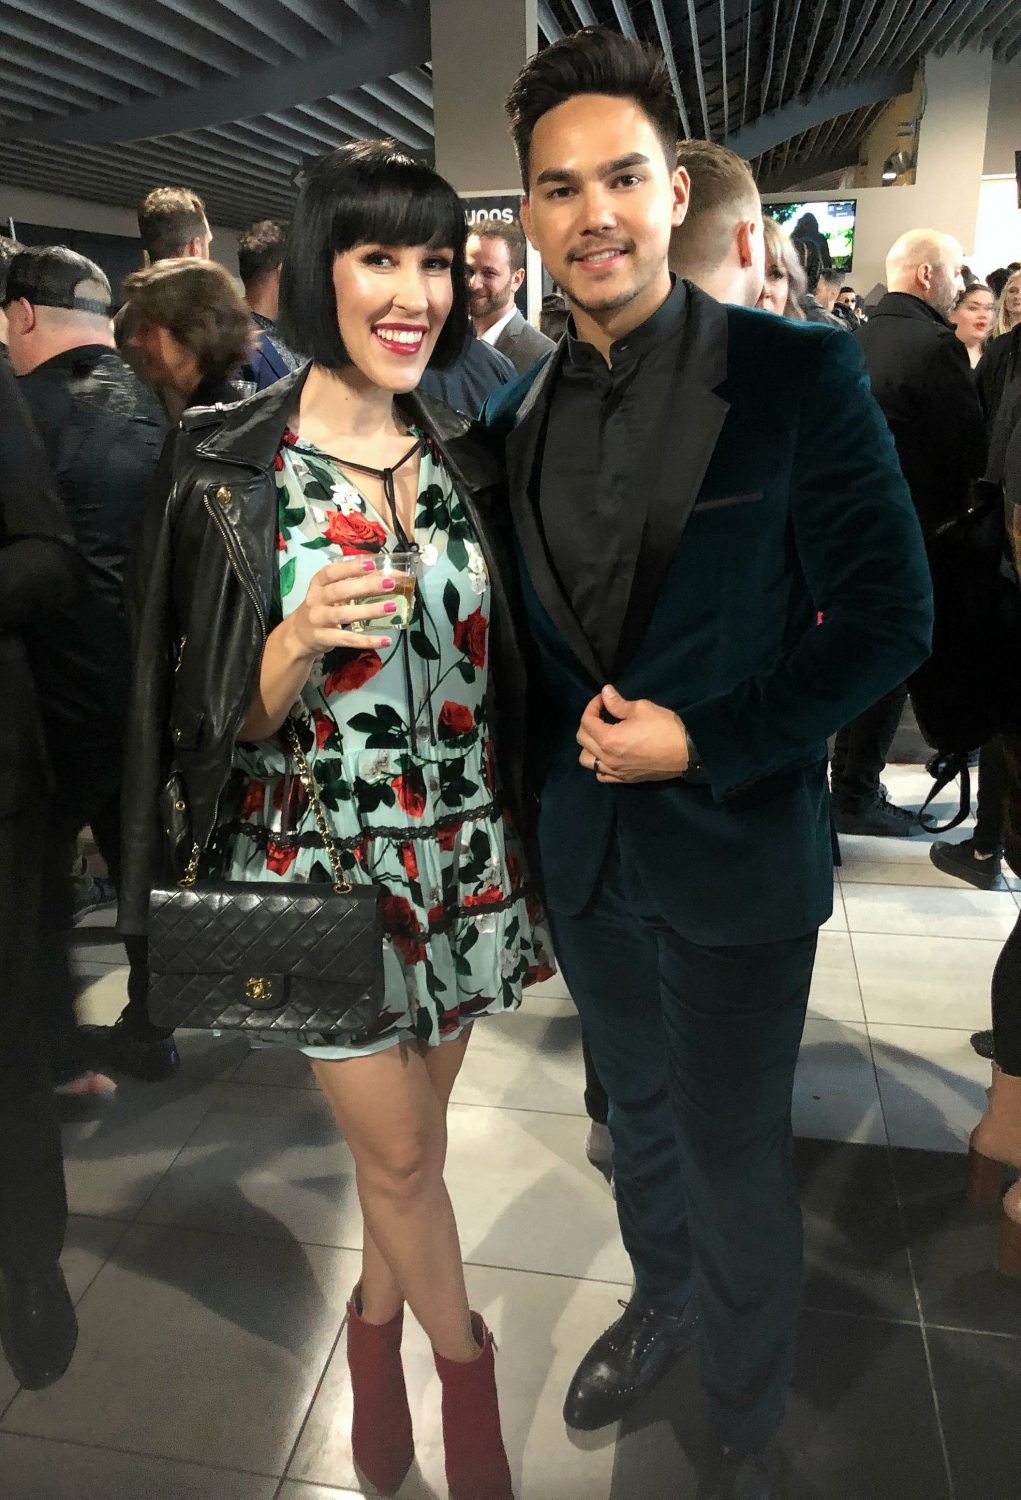 Tyler Shaw and The Pink Millennial at the 2019 Juno Awards in London ON